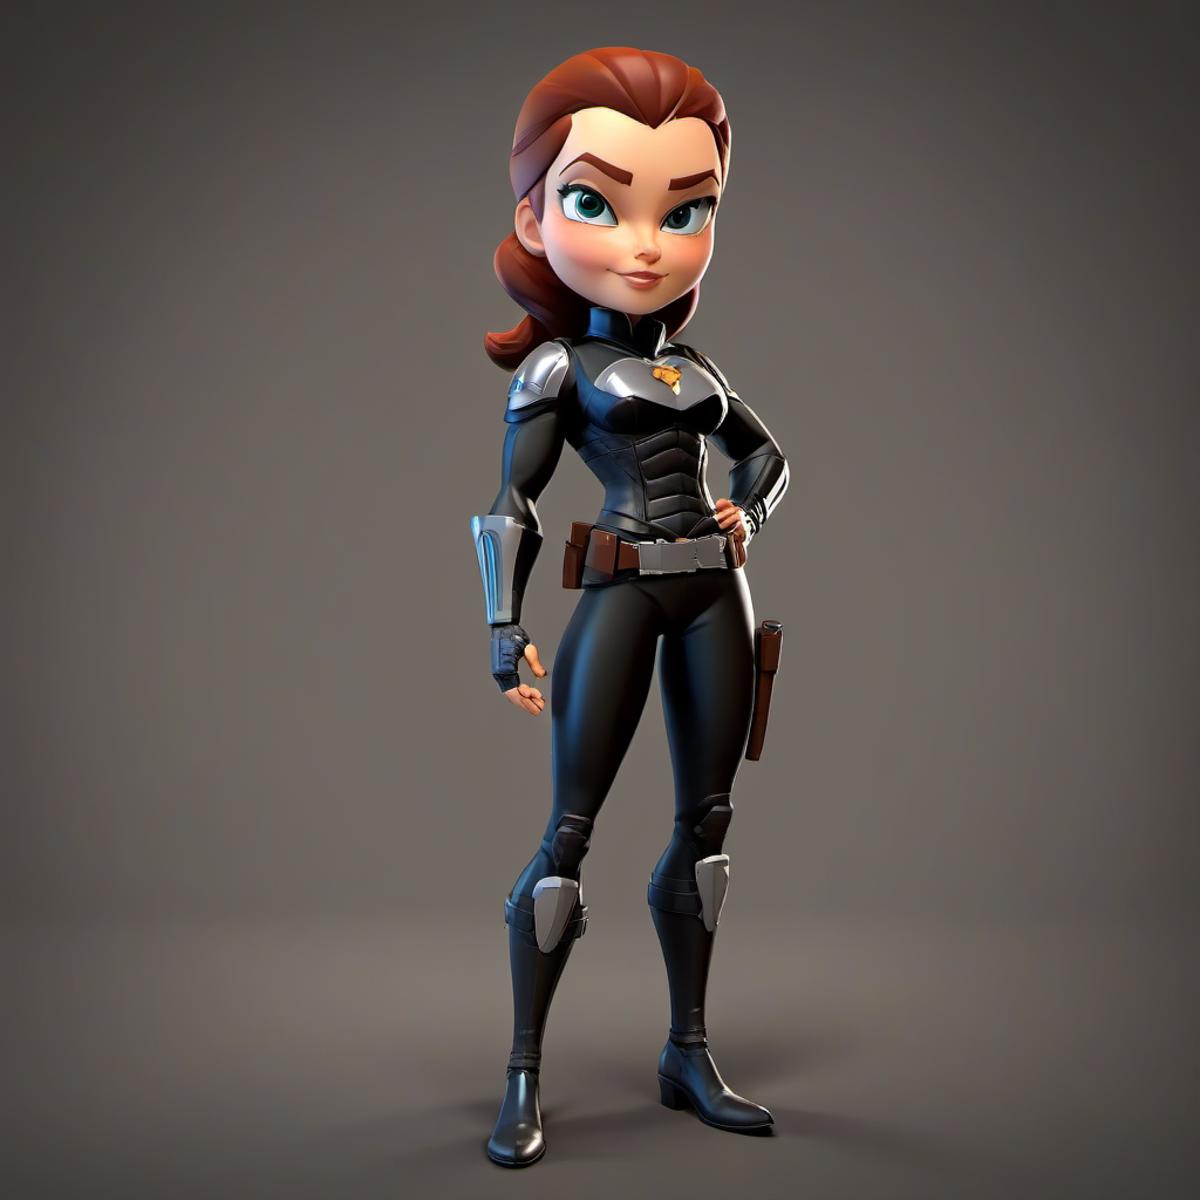 STYLIZARD - 3D Stylized Character Prototyping image by Clumsy_Trainer